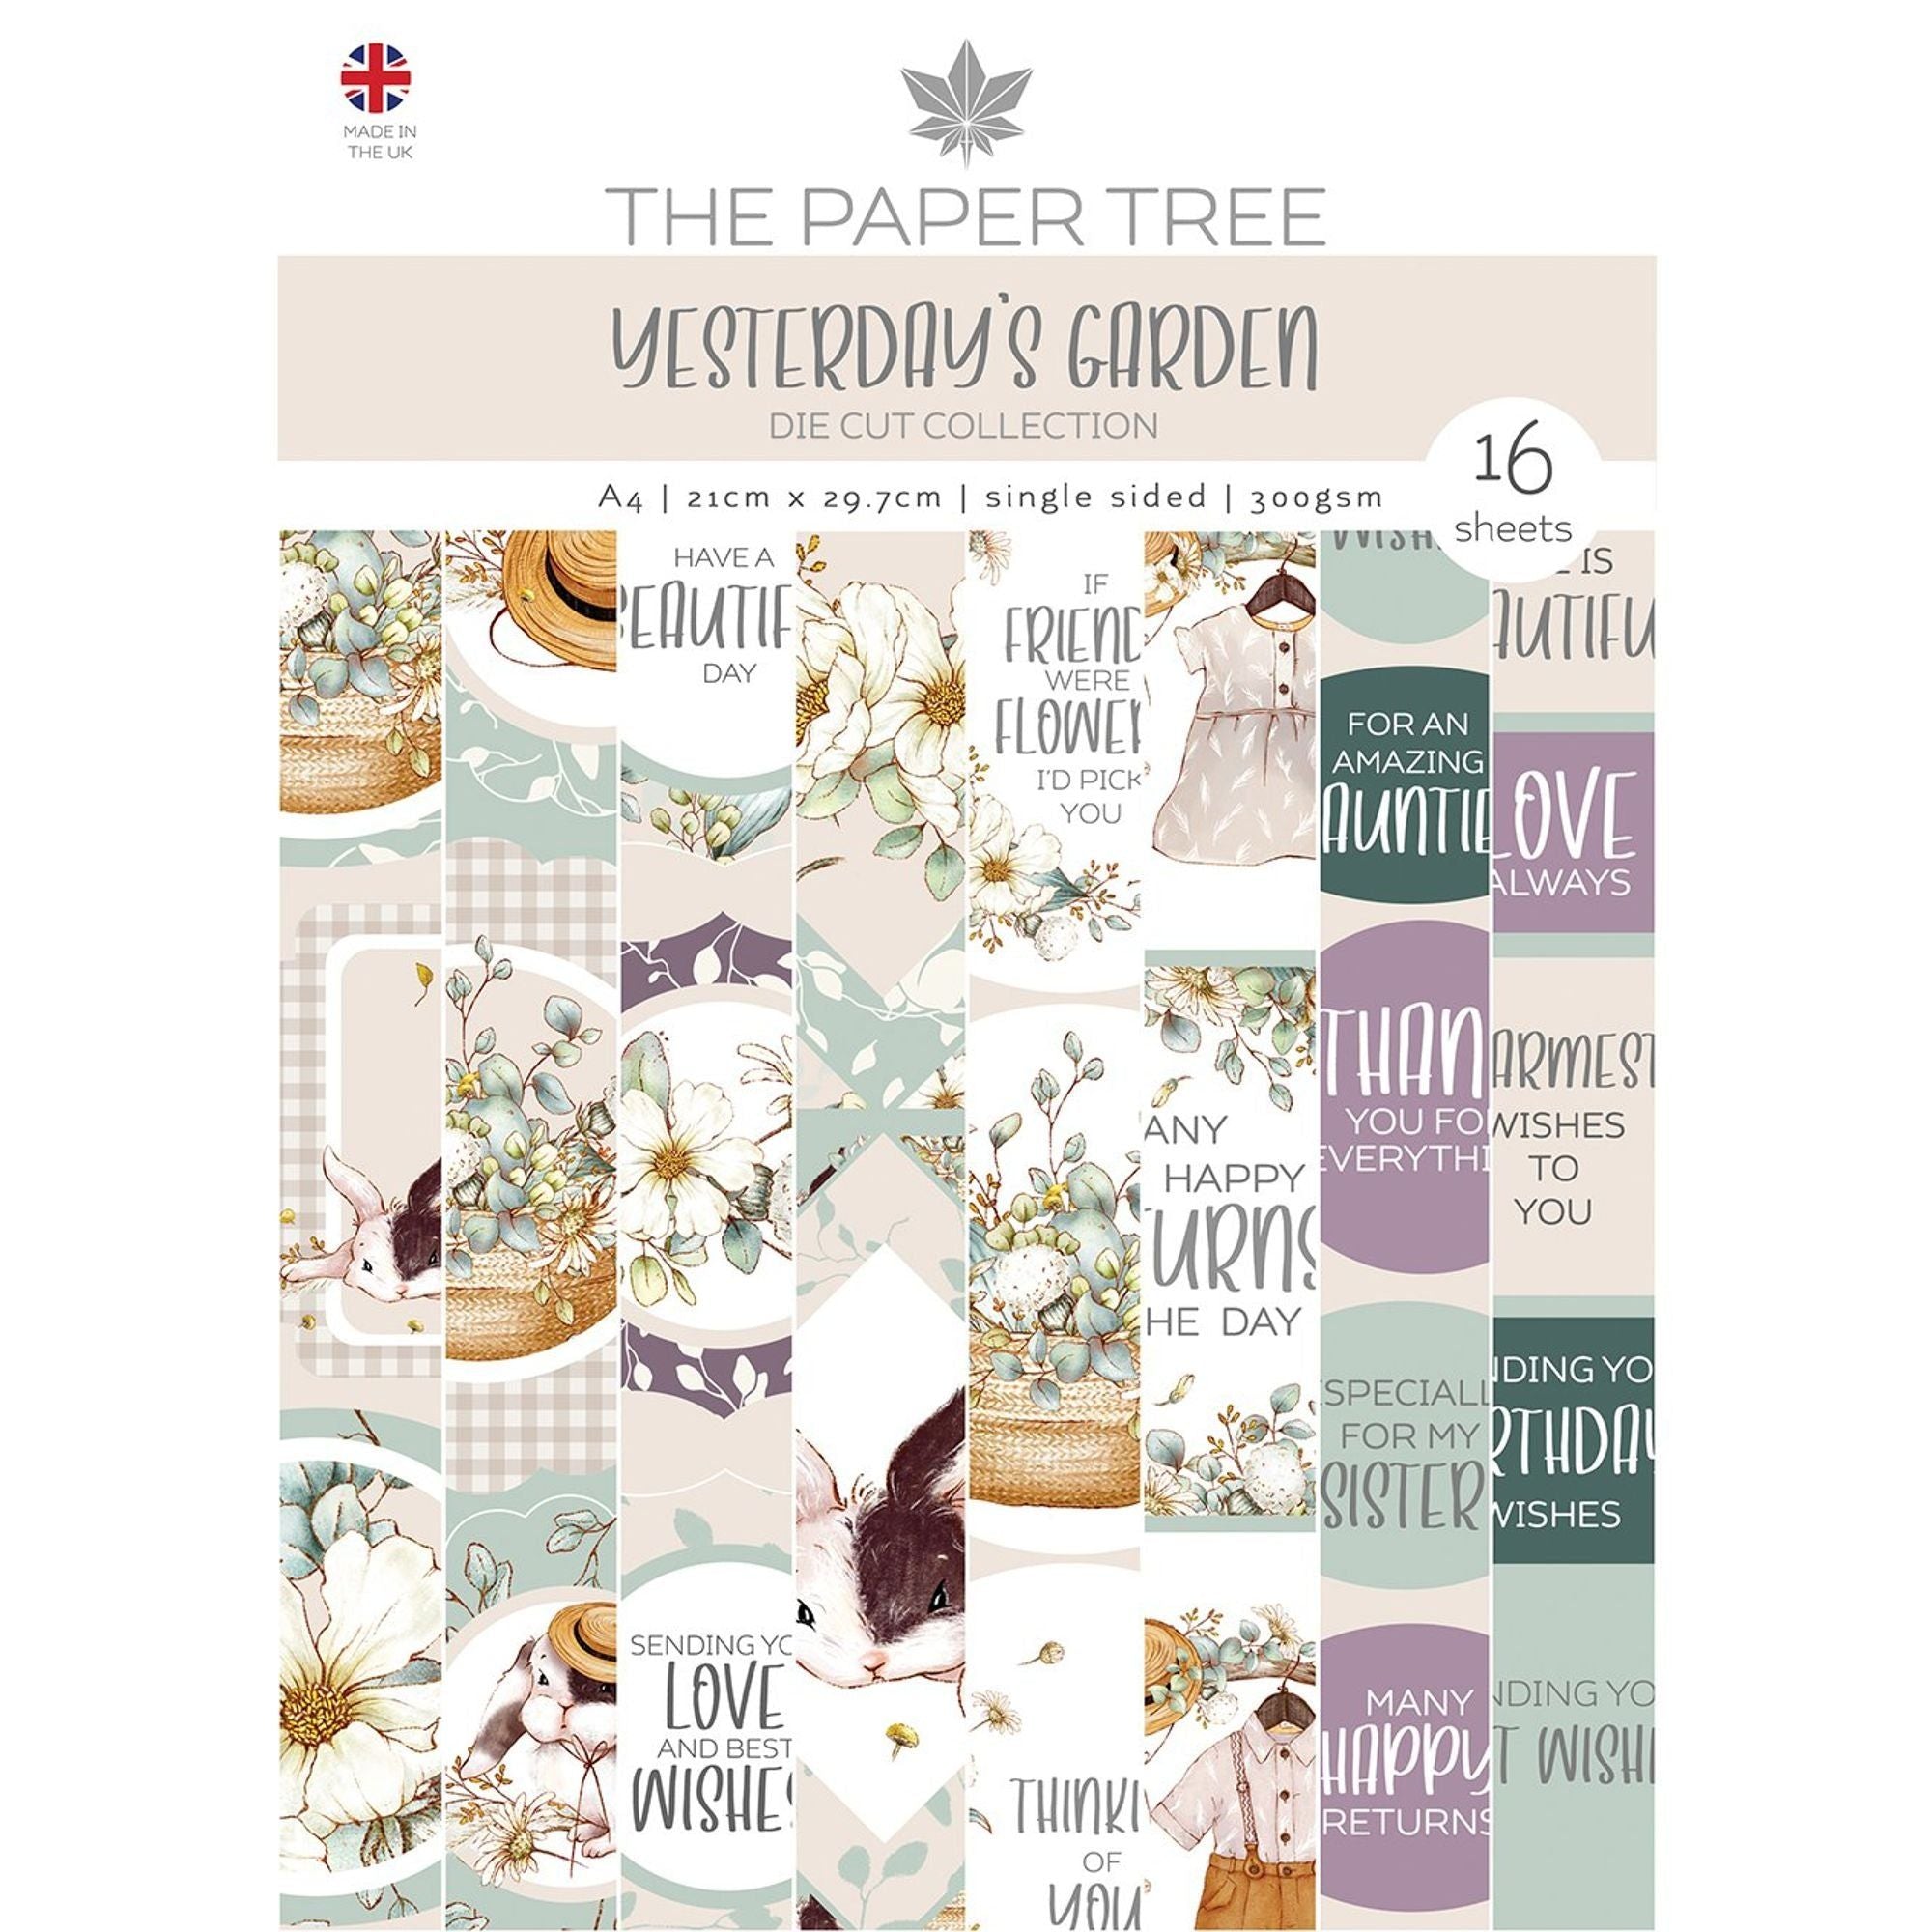 The Paper Tree Yesterdays Garden A4 Die Cut sheets